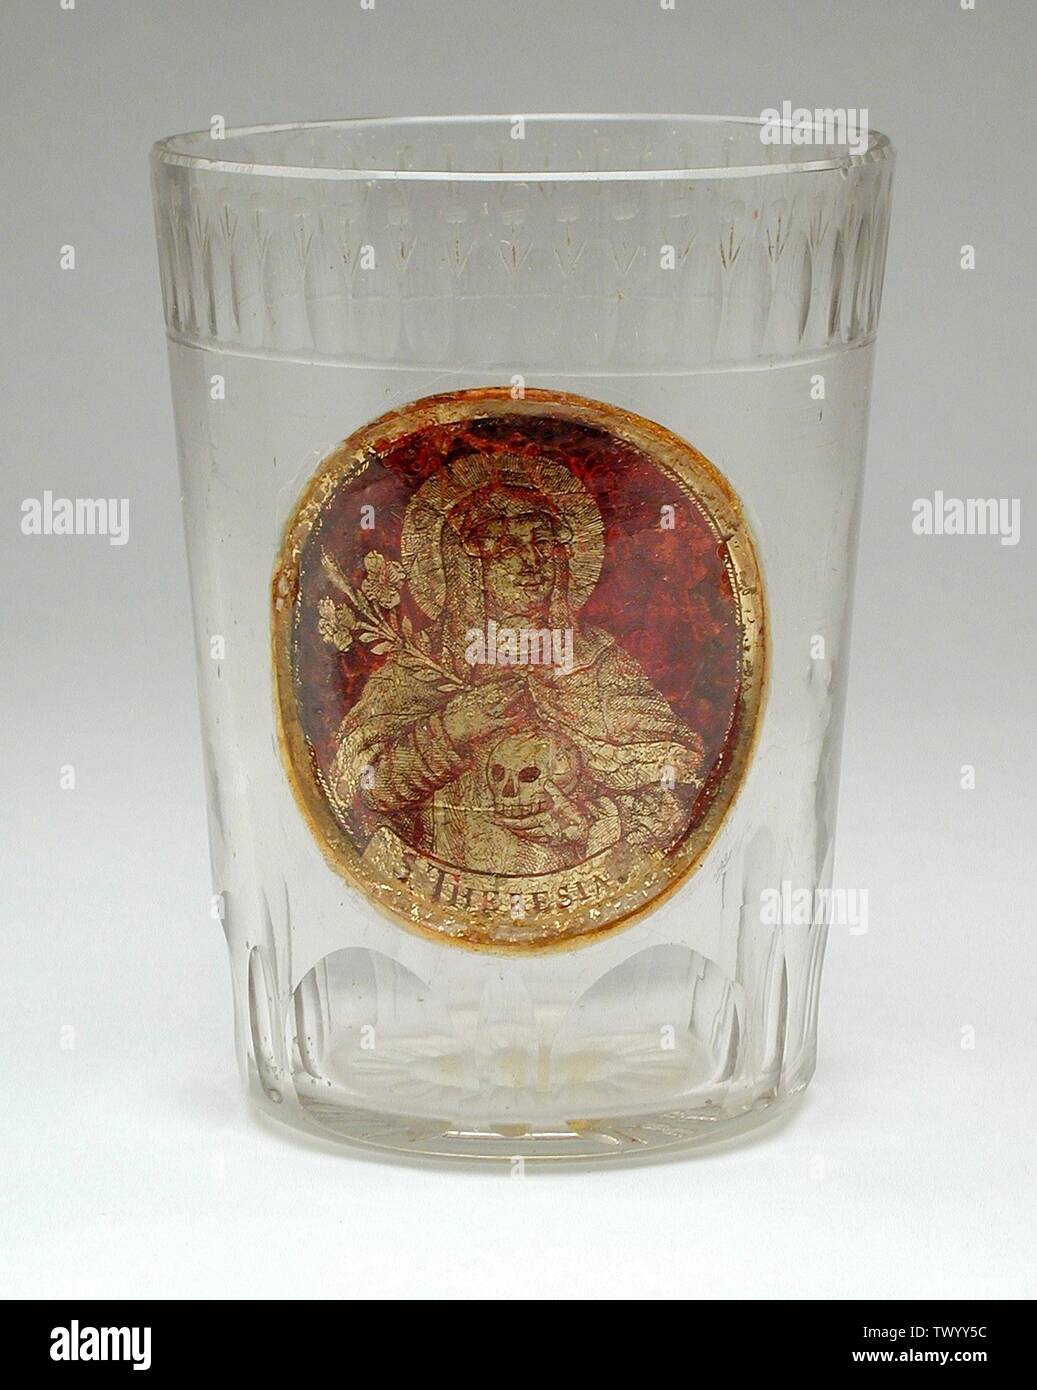 Beaker with St. Theresa;  Austria, 1789 Furnishings; Serviceware Glass, gilt Height: 4 in. (10.16 cm) William Randolph Hearst Collection (48.24.42) Decorative Arts and Design; 1789date QS:P571,+1789-00-00T00:00:00Z/9; Stock Photo